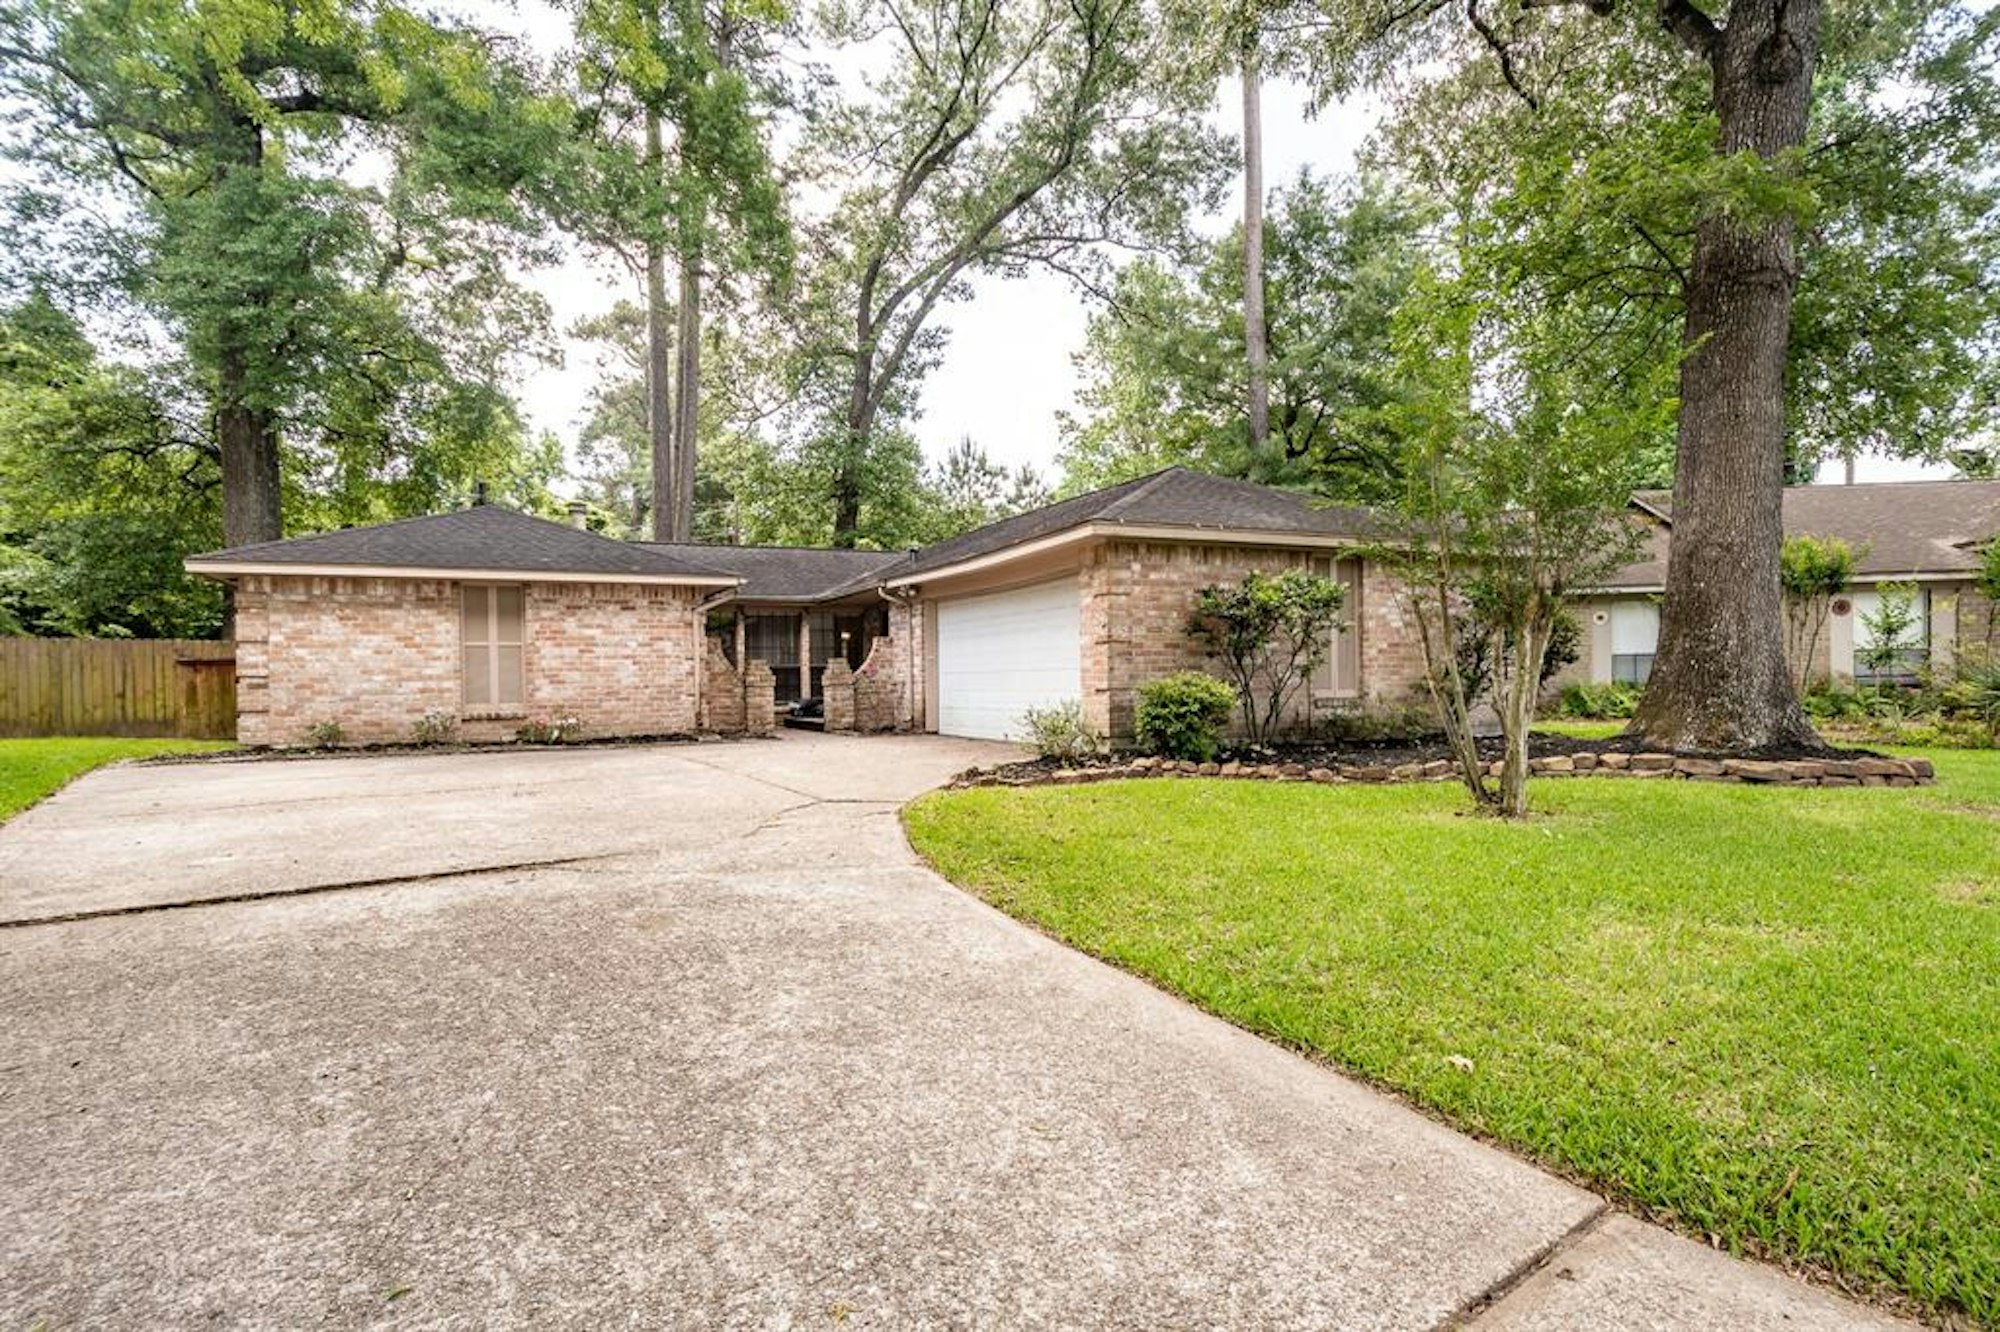 Photo 1 of 33 - 2774 Tinechester Dr, Kingwood, TX 77339